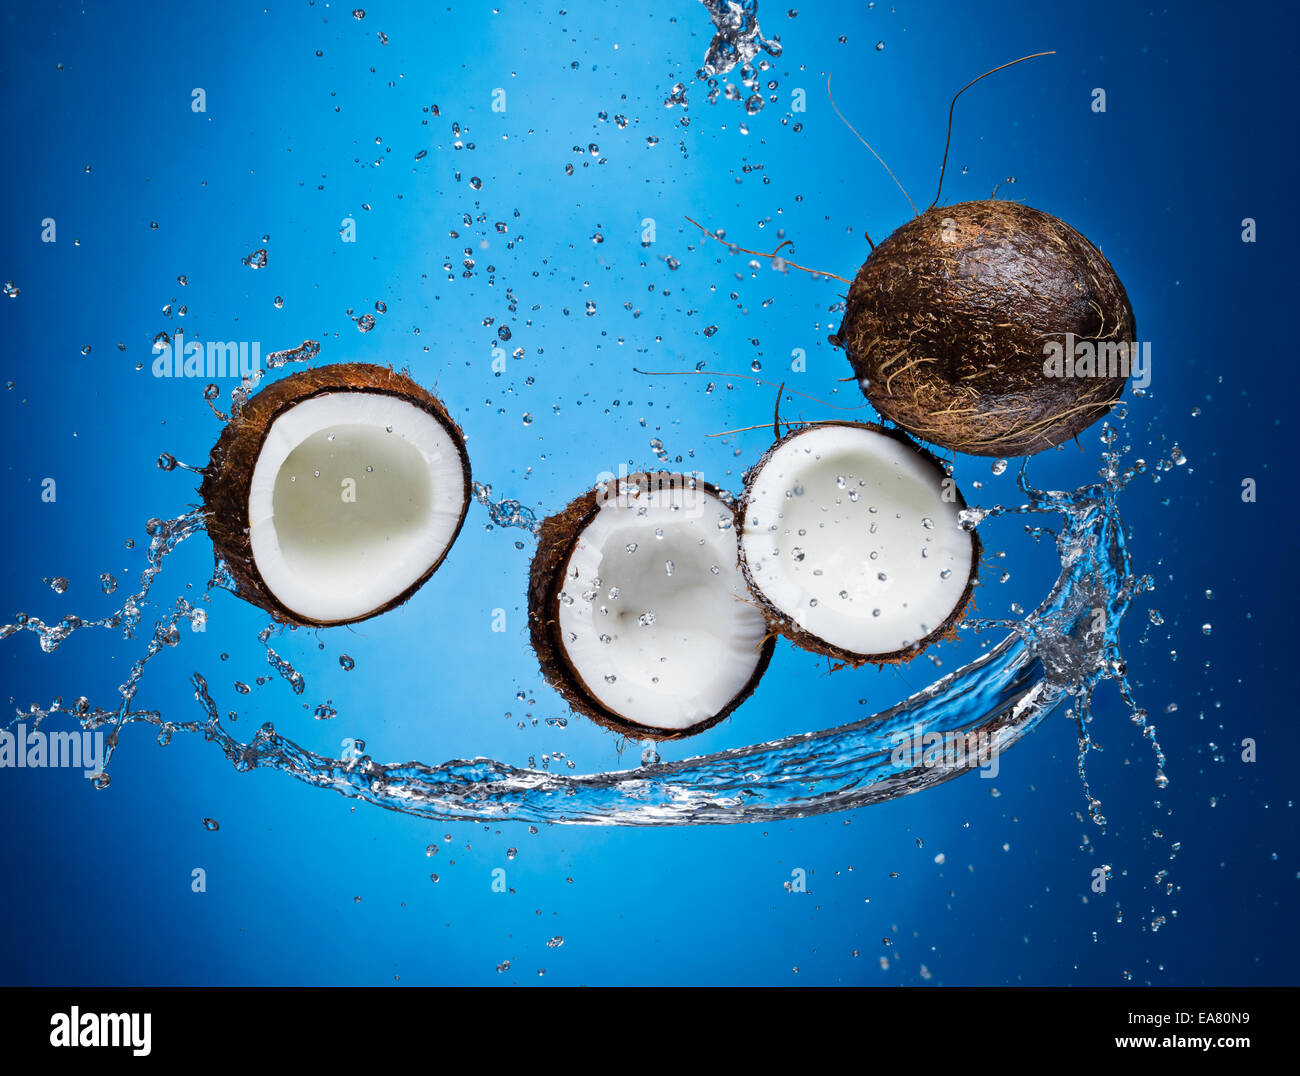 Studio shot of cracked coconuts with water splash on blue background Stock Photo